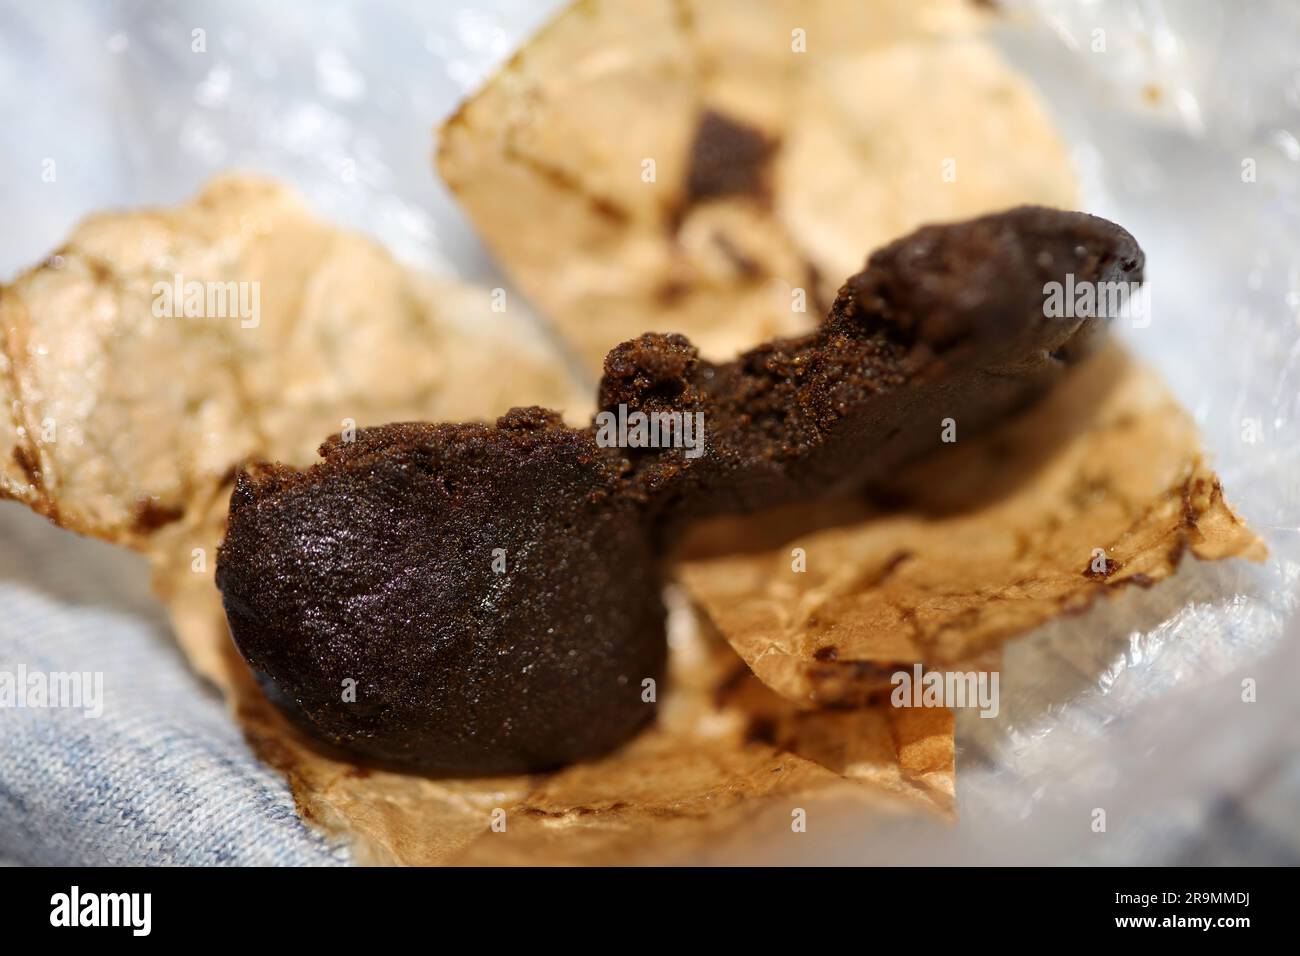 Detail of medical marijuana nepalese high thc brown charas close up bio cannabis resin hashish in Nepal extraction dry hash pollen big size amazing qu Stock Photo